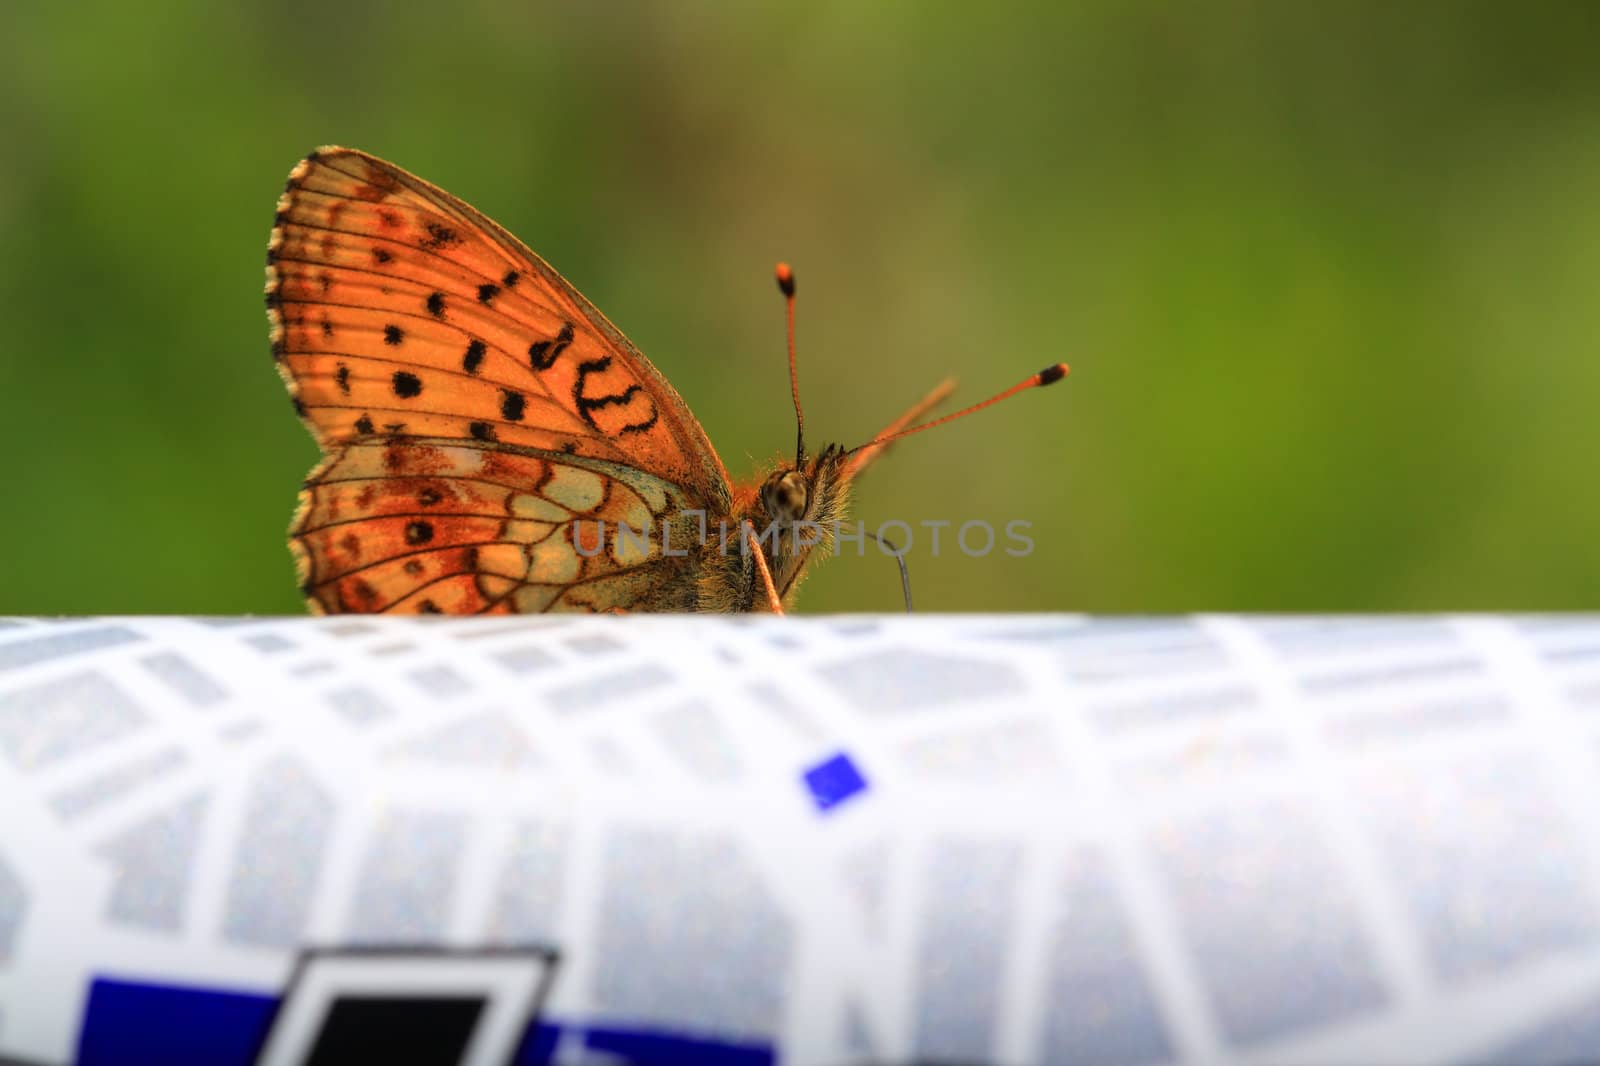 red butterfly on abstract surface by basel101658